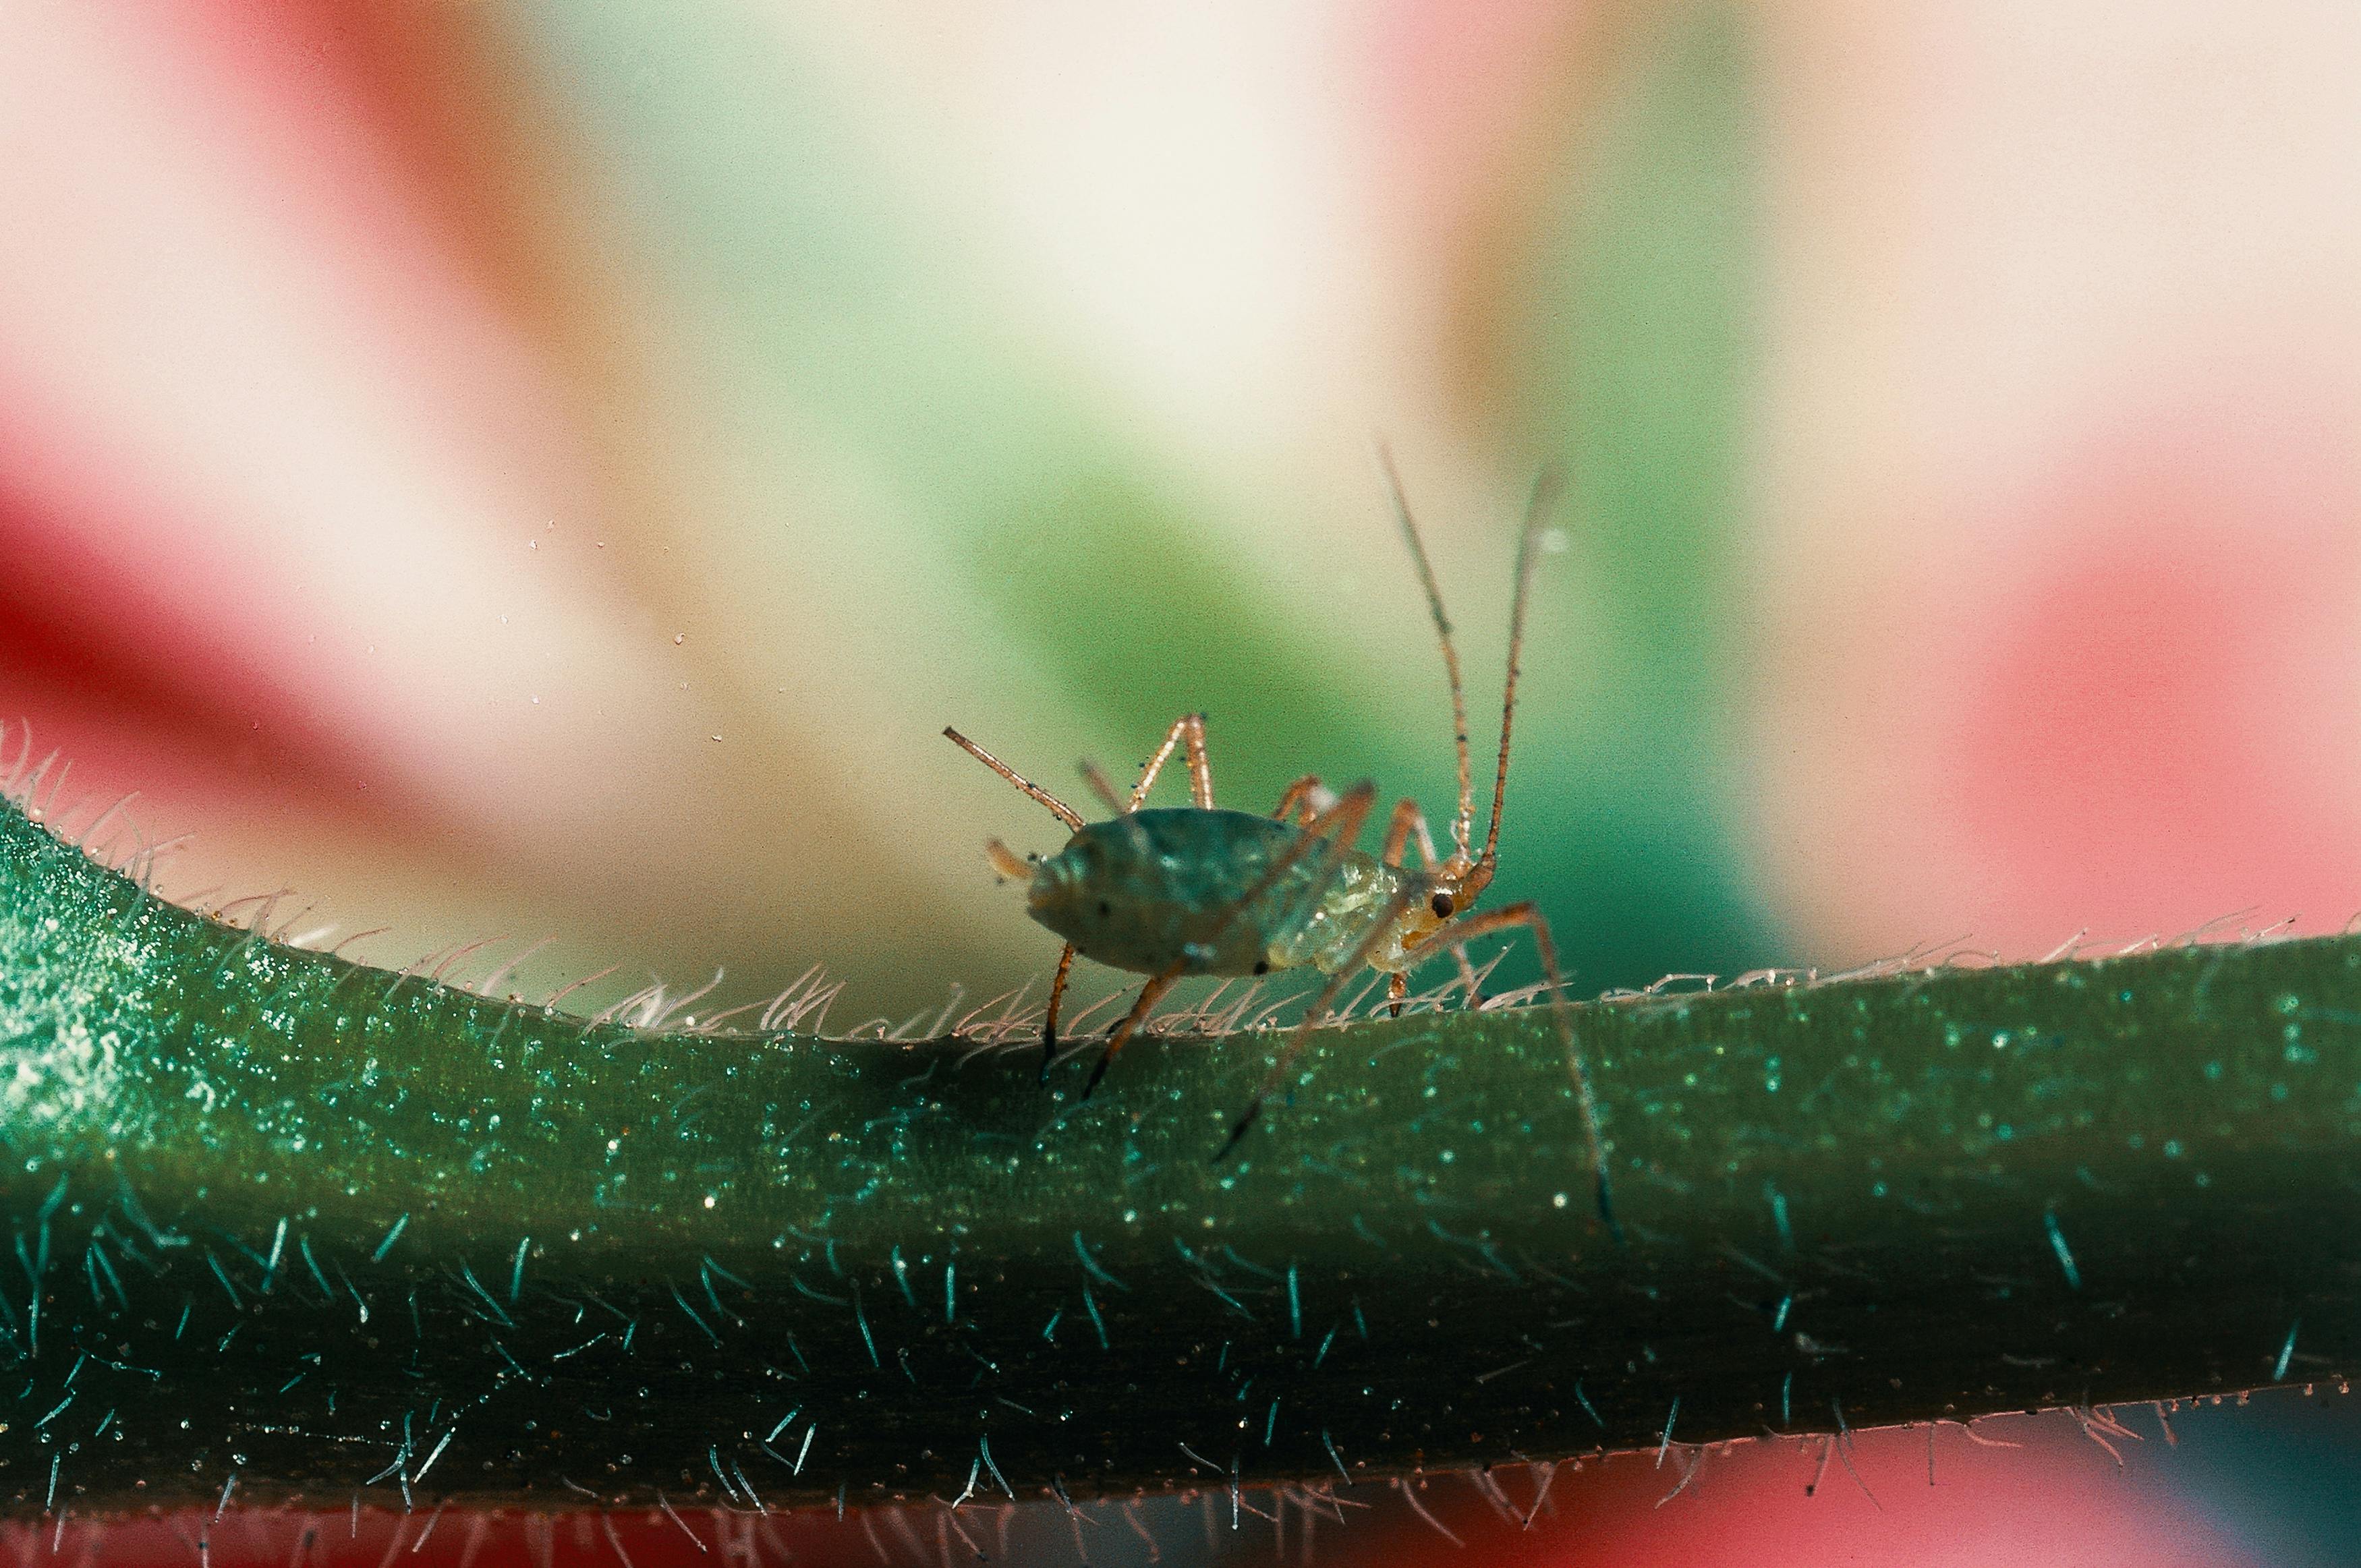 Aphids (Aphidoidea) on a pear tree branch. Aphids are one of the most common cannabis pests.